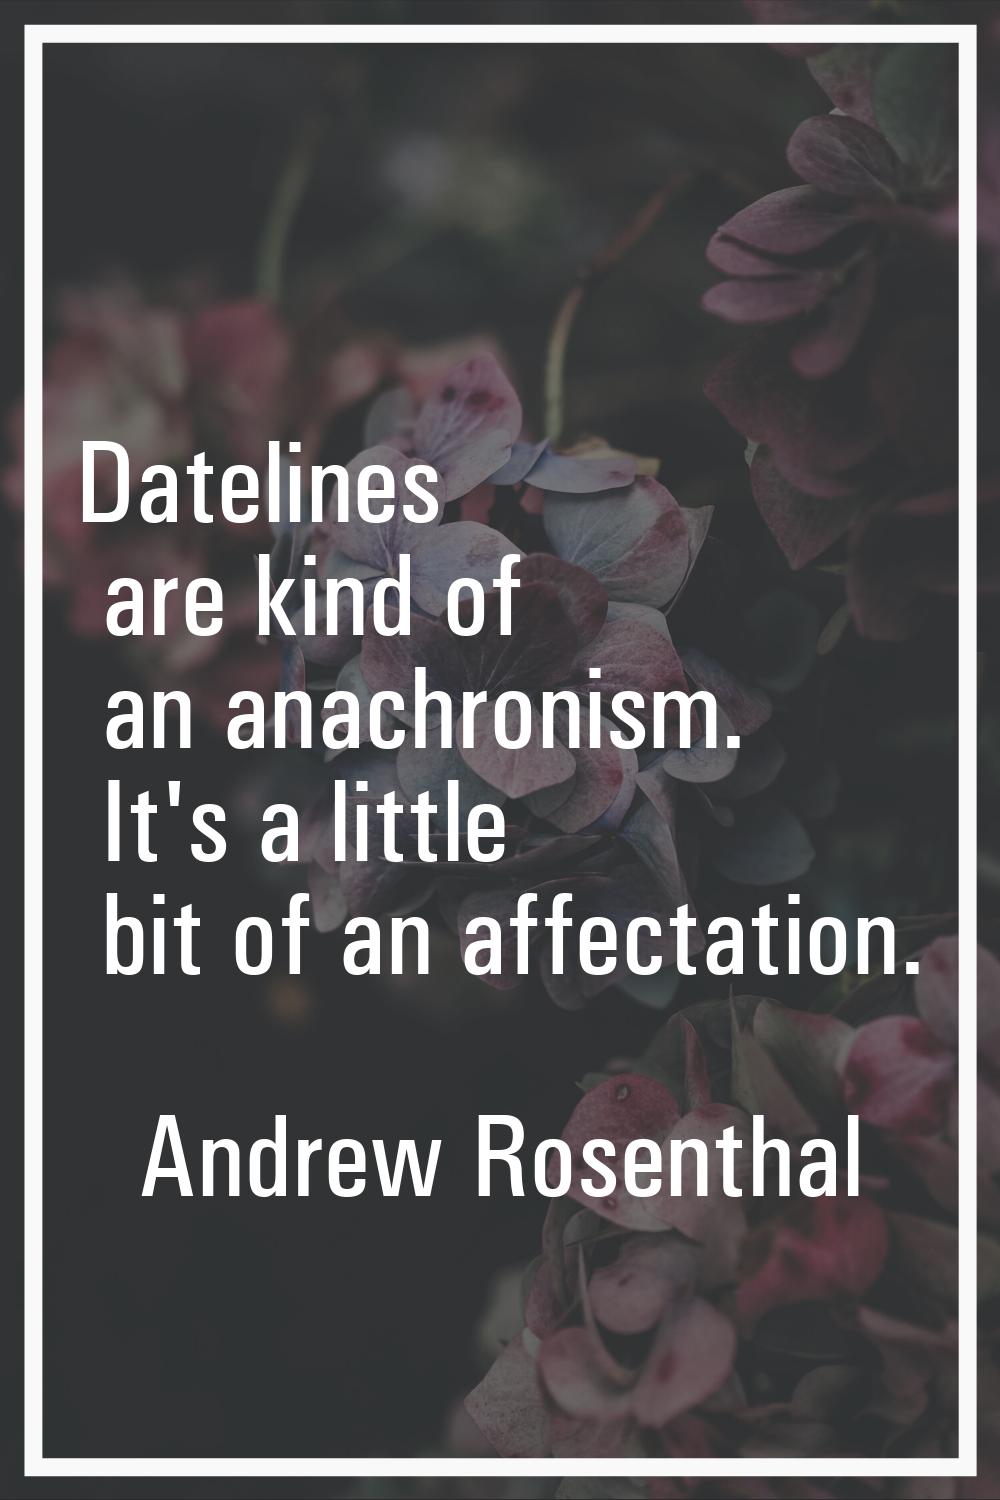 Datelines are kind of an anachronism. It's a little bit of an affectation.